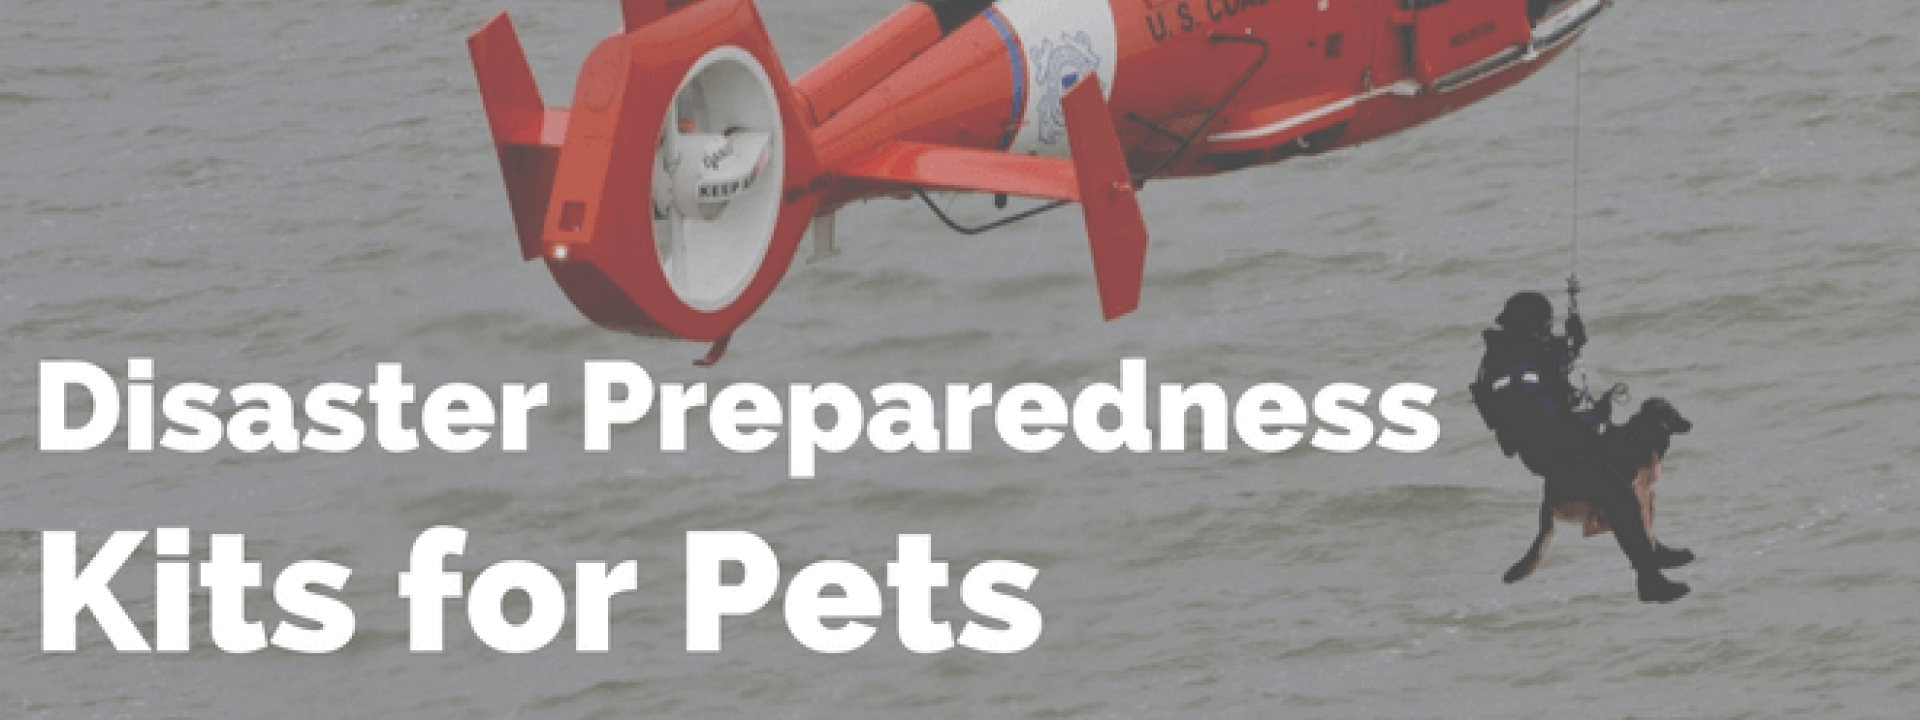 blog-title-disaster-preparedness-kits-for-pets.png